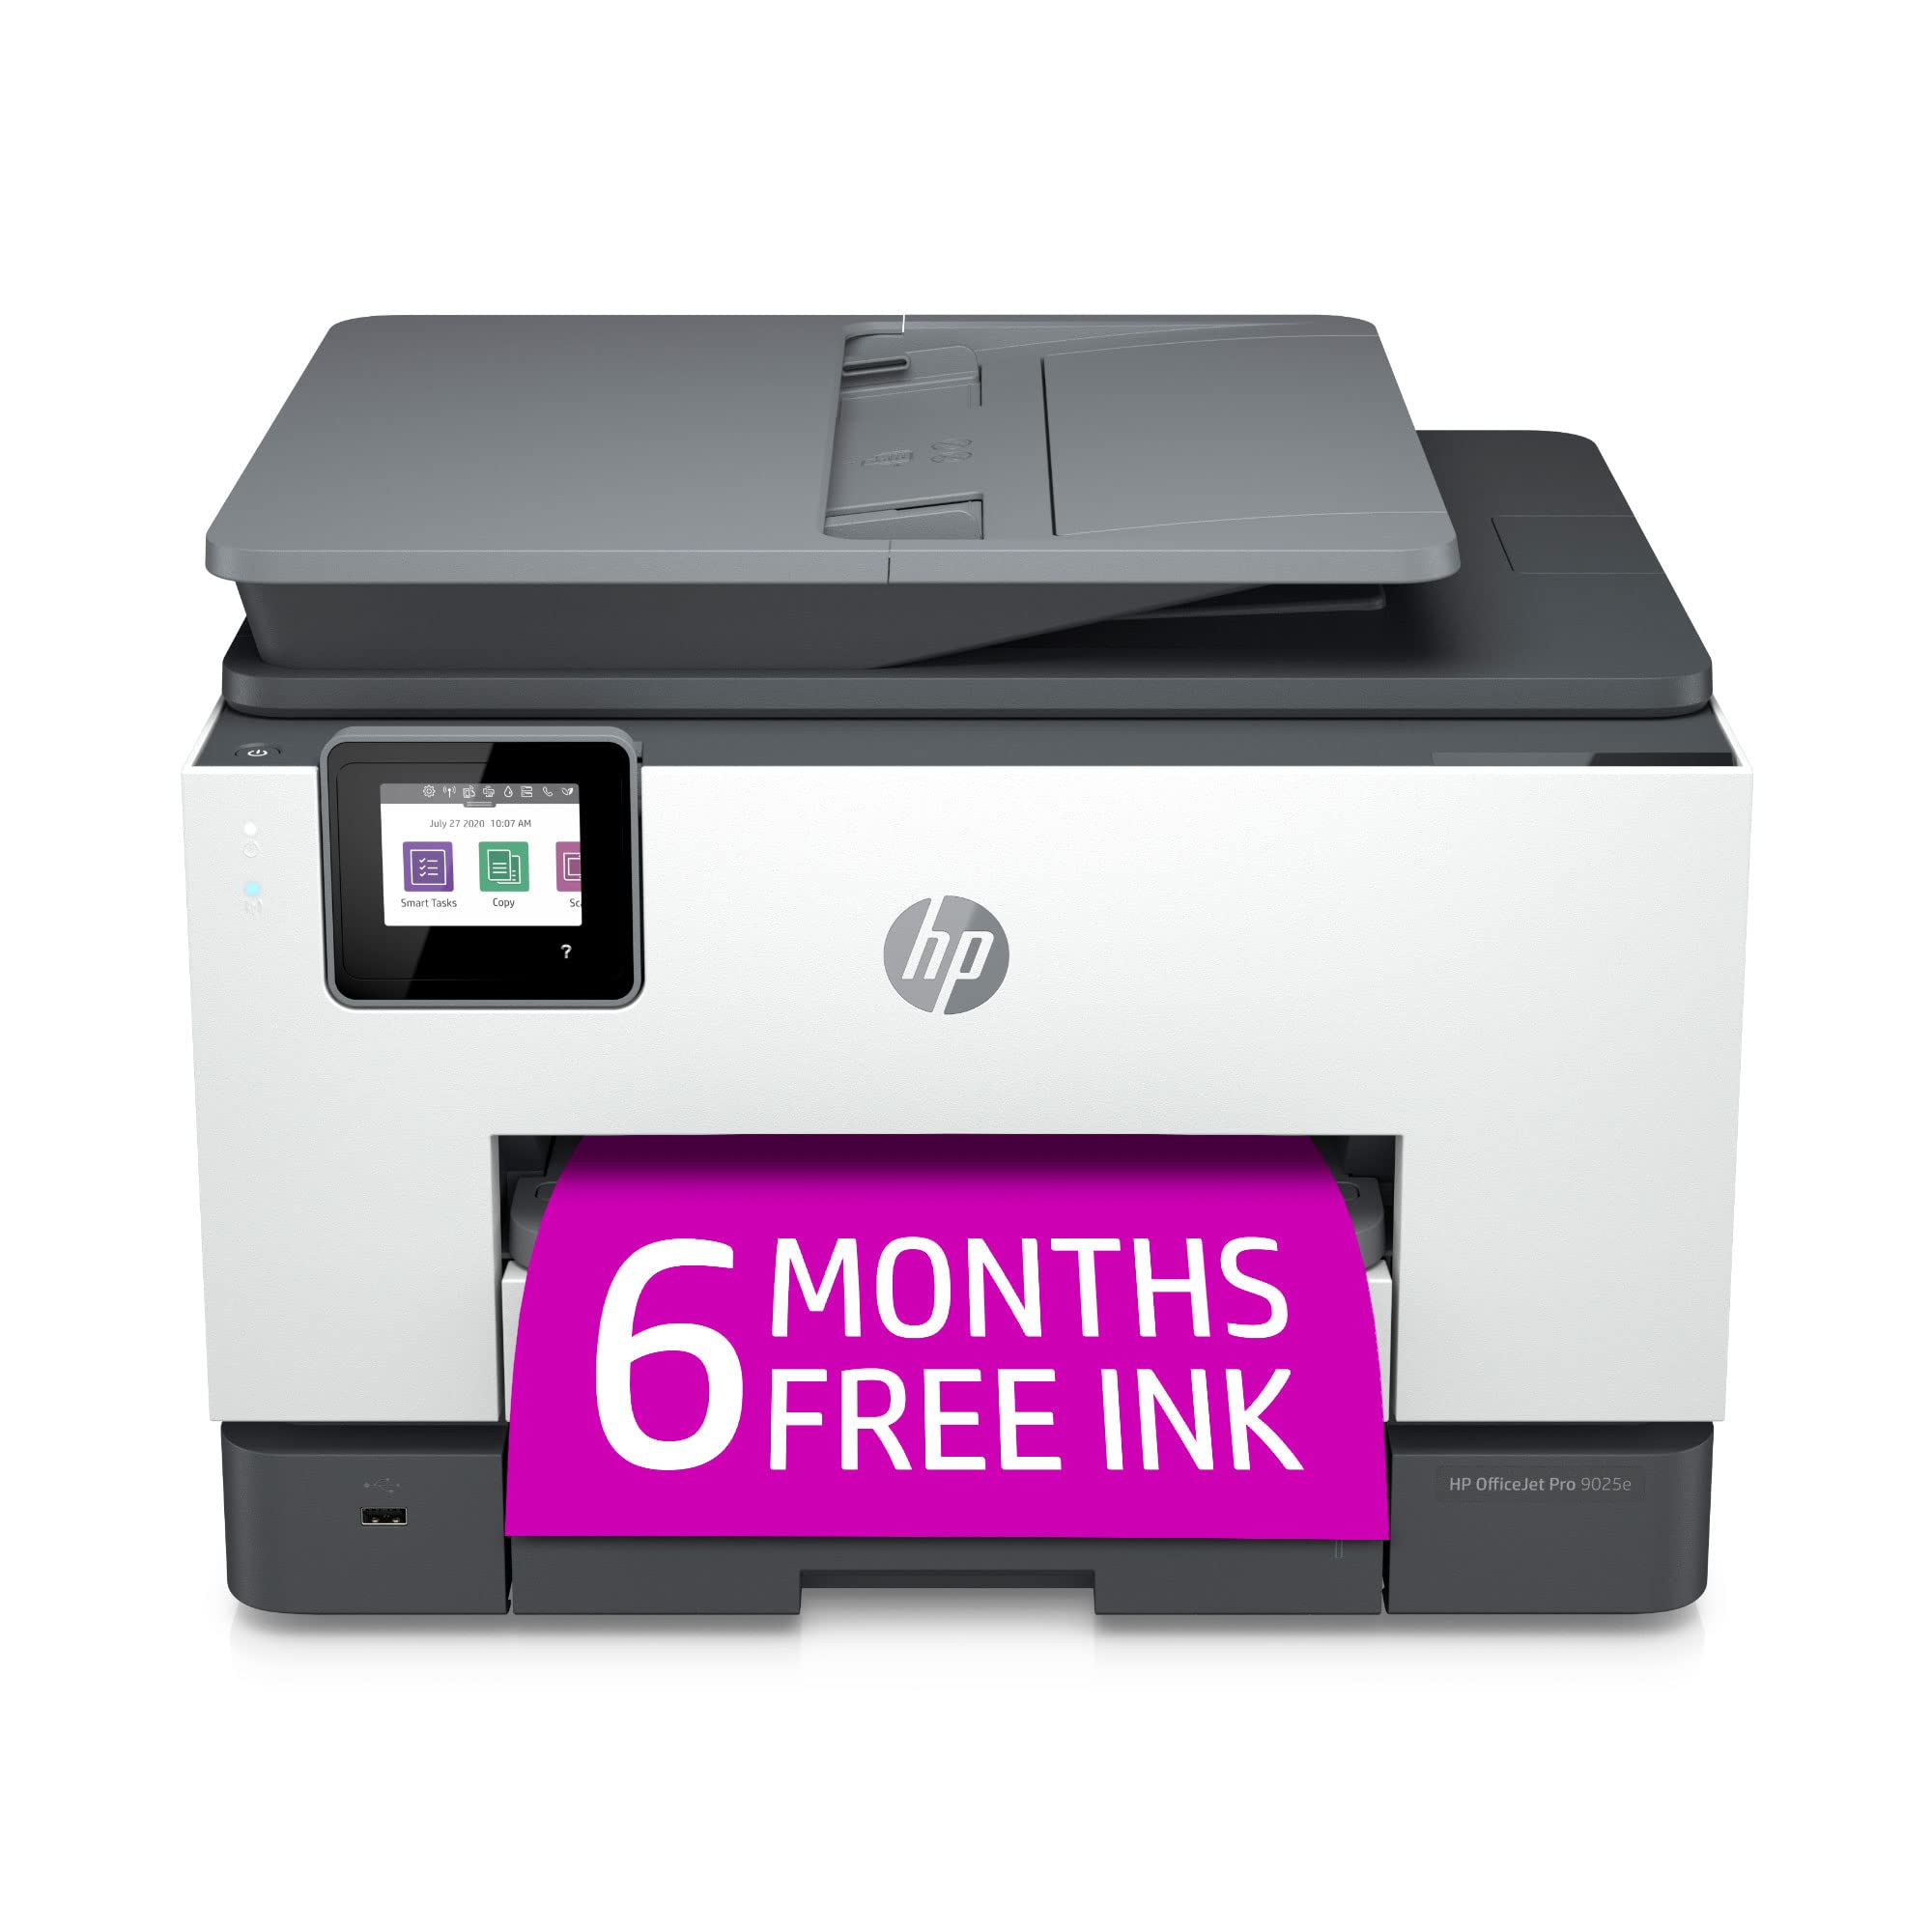 HP OfficeJet Pro 9025e Wireless Color All-in-One Printer with Bonus 6 Months Instant Ink with HP+,Gray, Medium